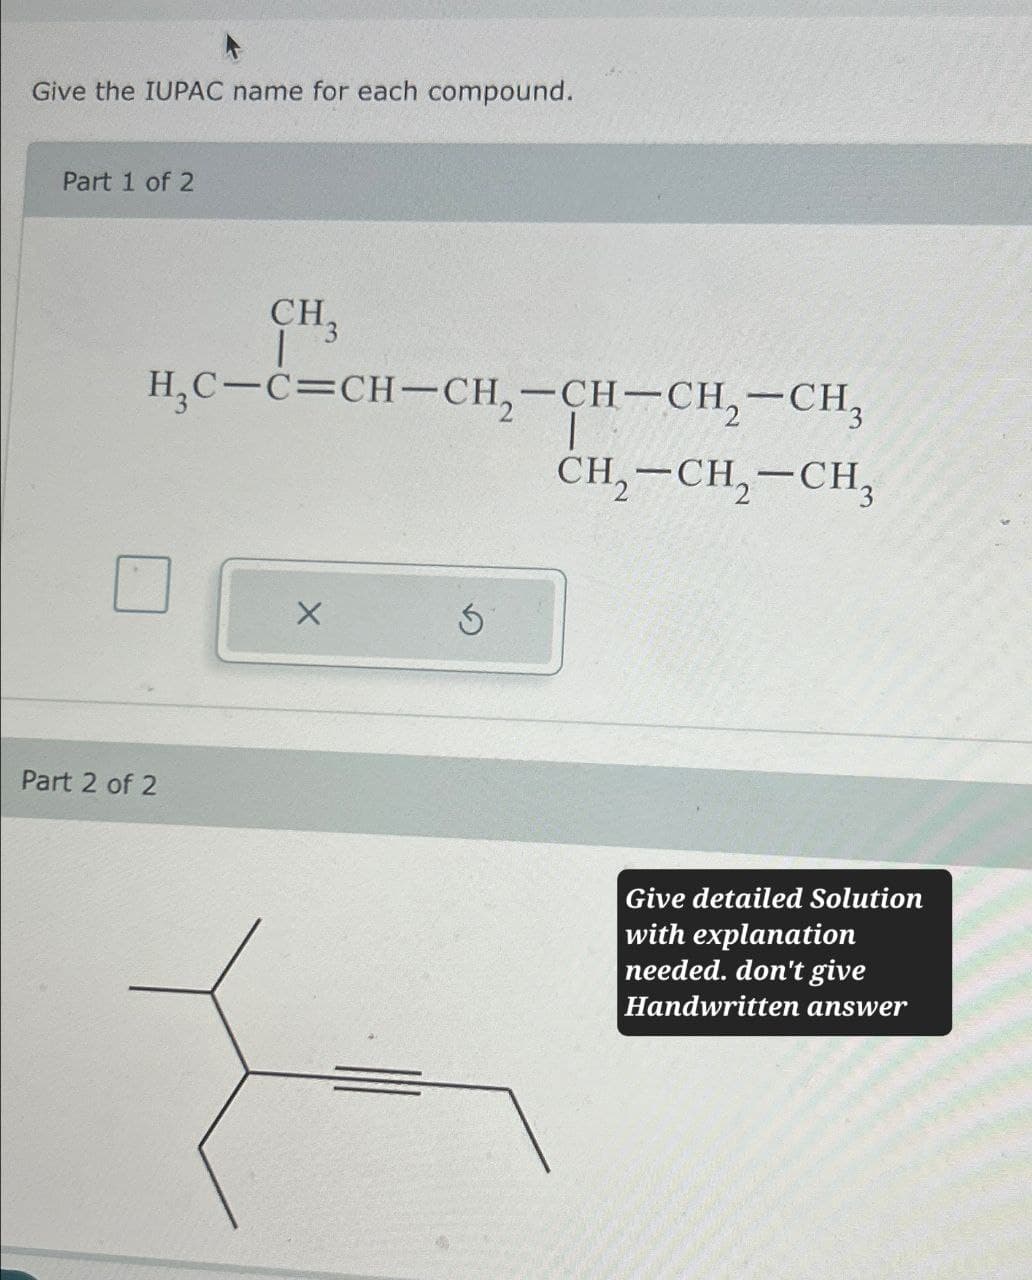 Give the IUPAC name for each compound.
Part 1 of 2
CH,
HC-C=CH-CH2-CH-CH2-CH3
CH2-CH2-CH3
Part 2 of 2
X
Give detailed Solution
with explanation
needed. don't give
Handwritten answer